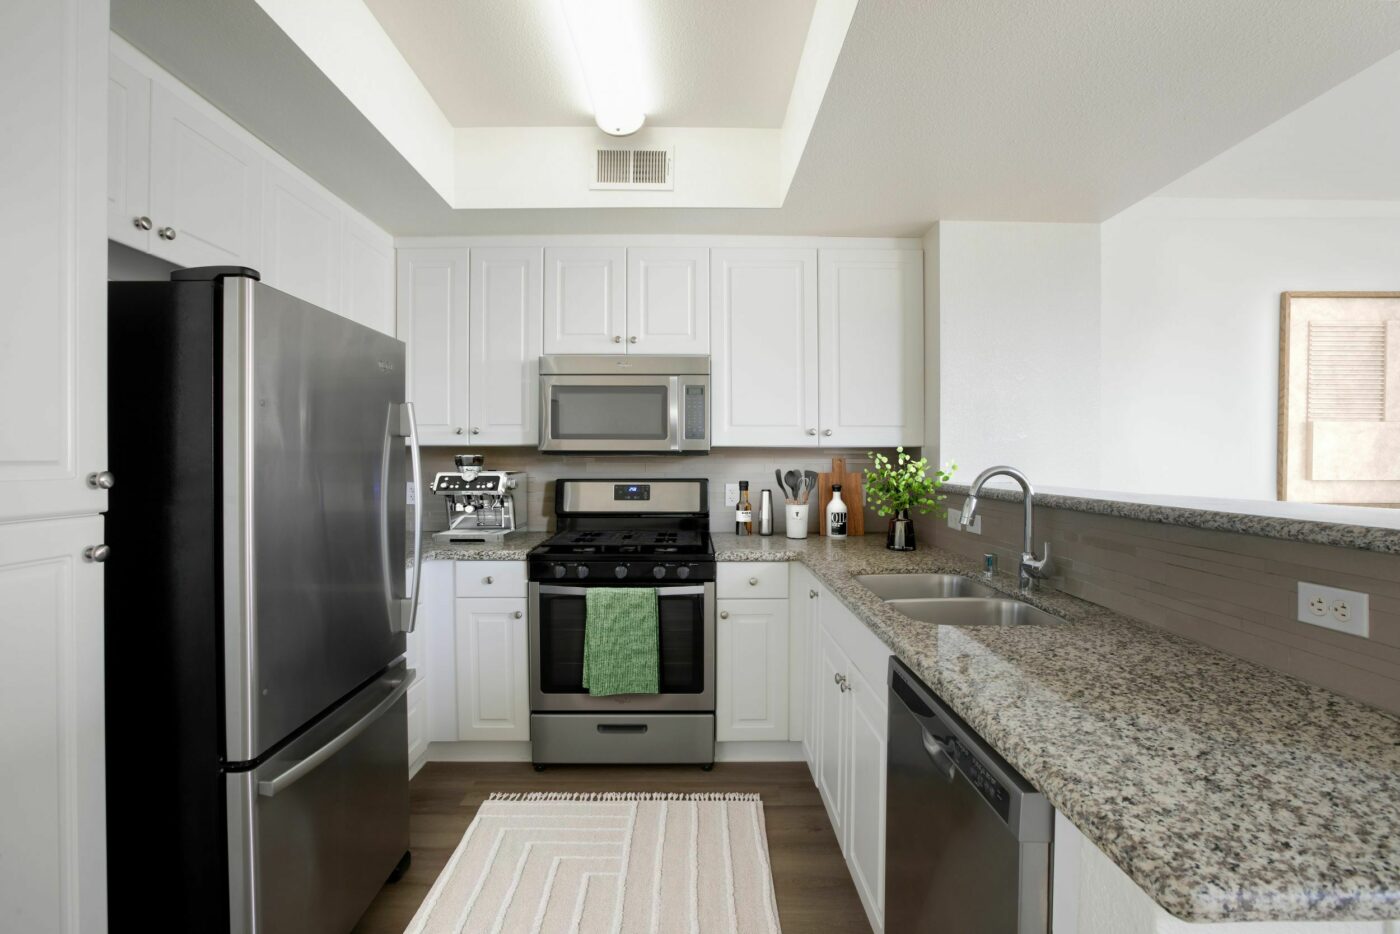 kitchen with speckled countertops and stainless steel appliances